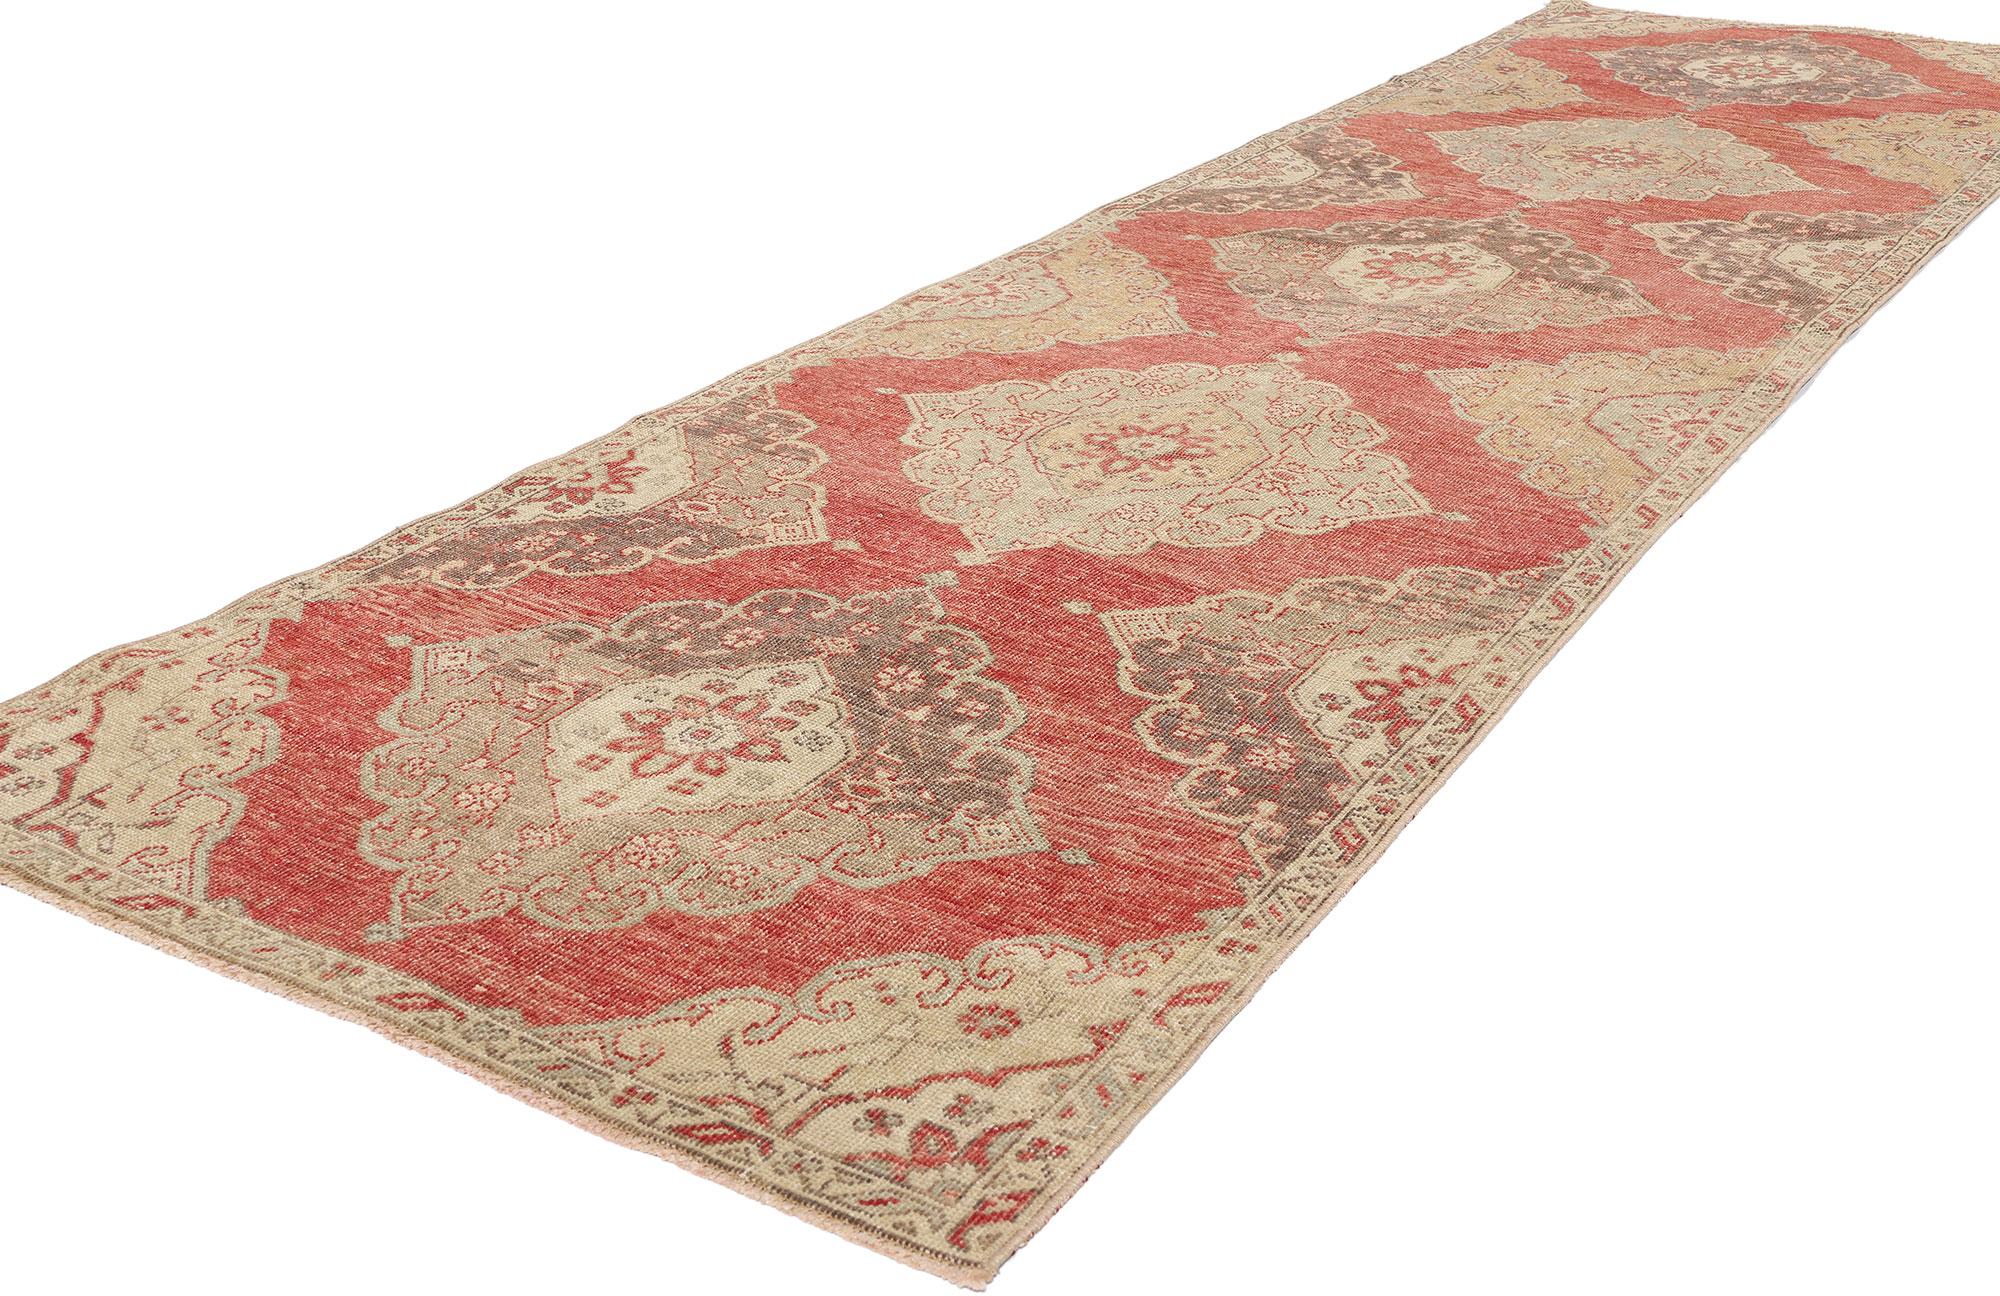 53911 Vintage Red Turkish Oushak Rug, 03'03 x 12'01. Please note this listing is for one piece. There is a matching piece available adds to its rarity. Turkish Oushak carpet runners are a type of traditional rug originating from the Oushak region in